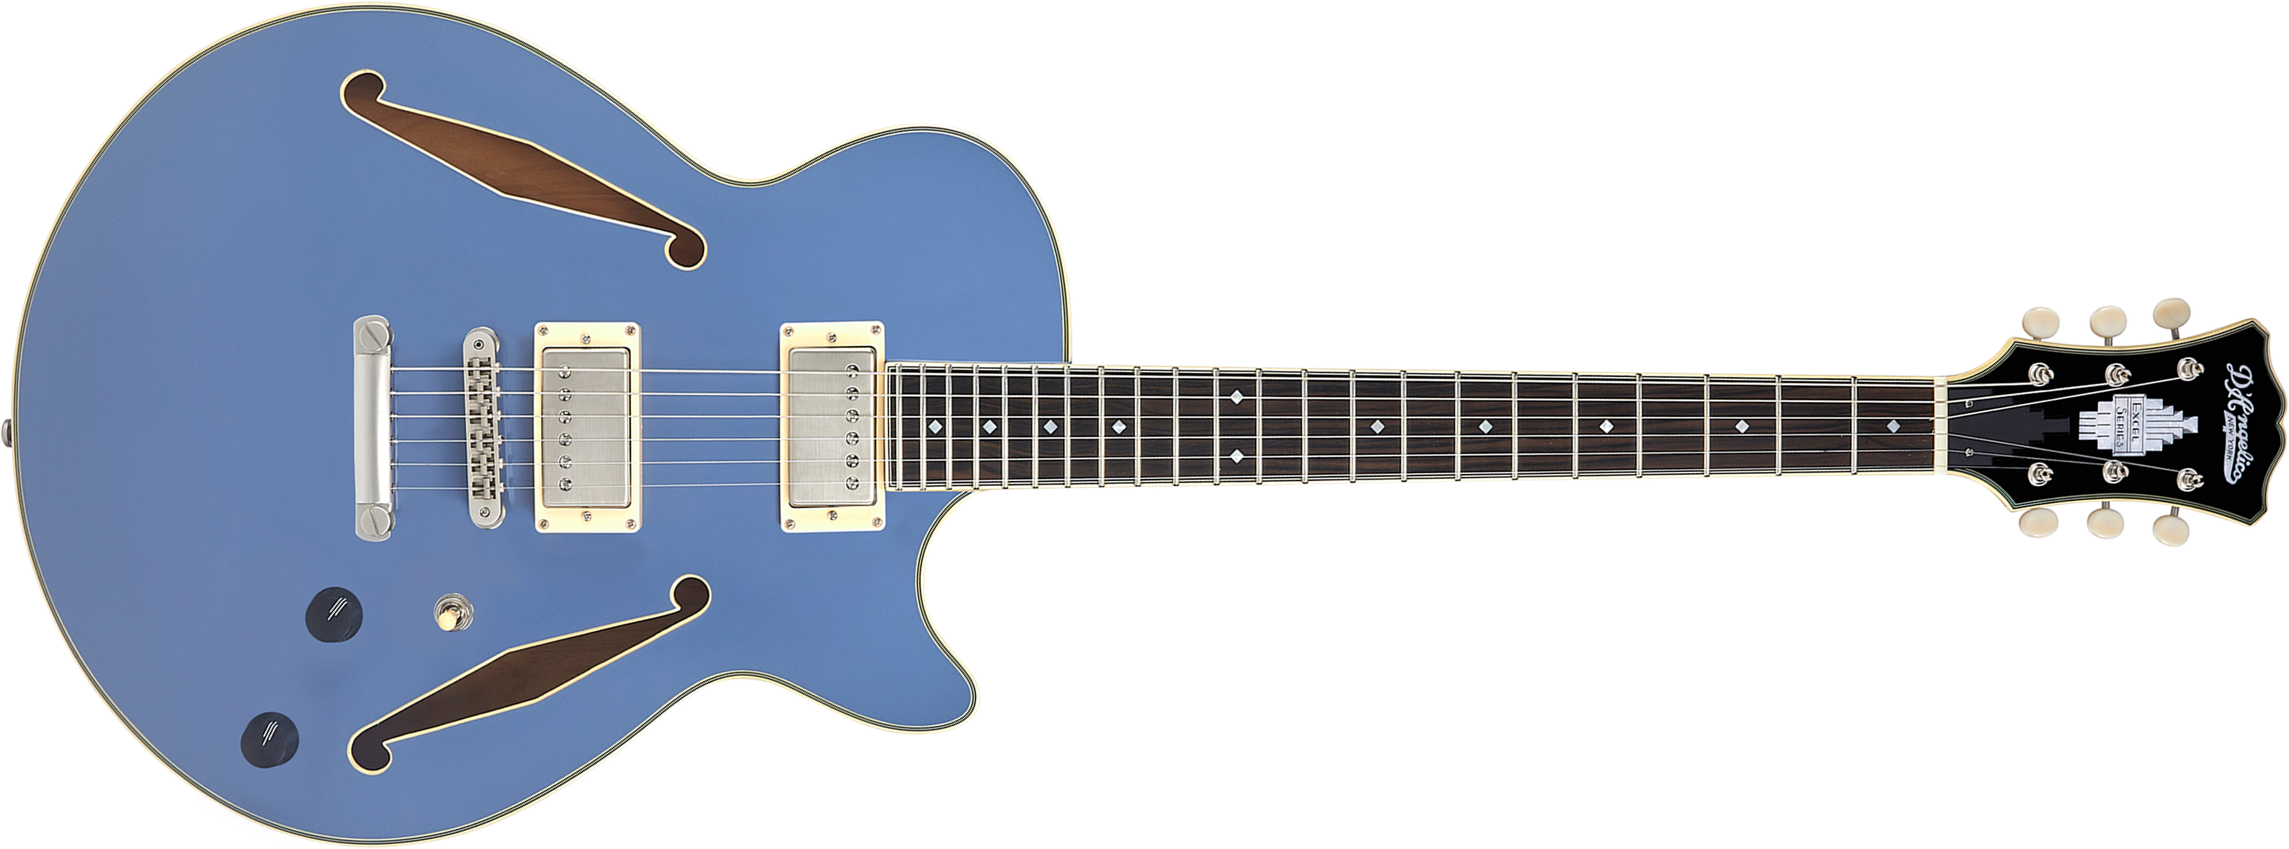 D'angelico Ss Tour Excel 2h Ht Eb - Slate Blue - Semi-hollow electric guitar - Main picture